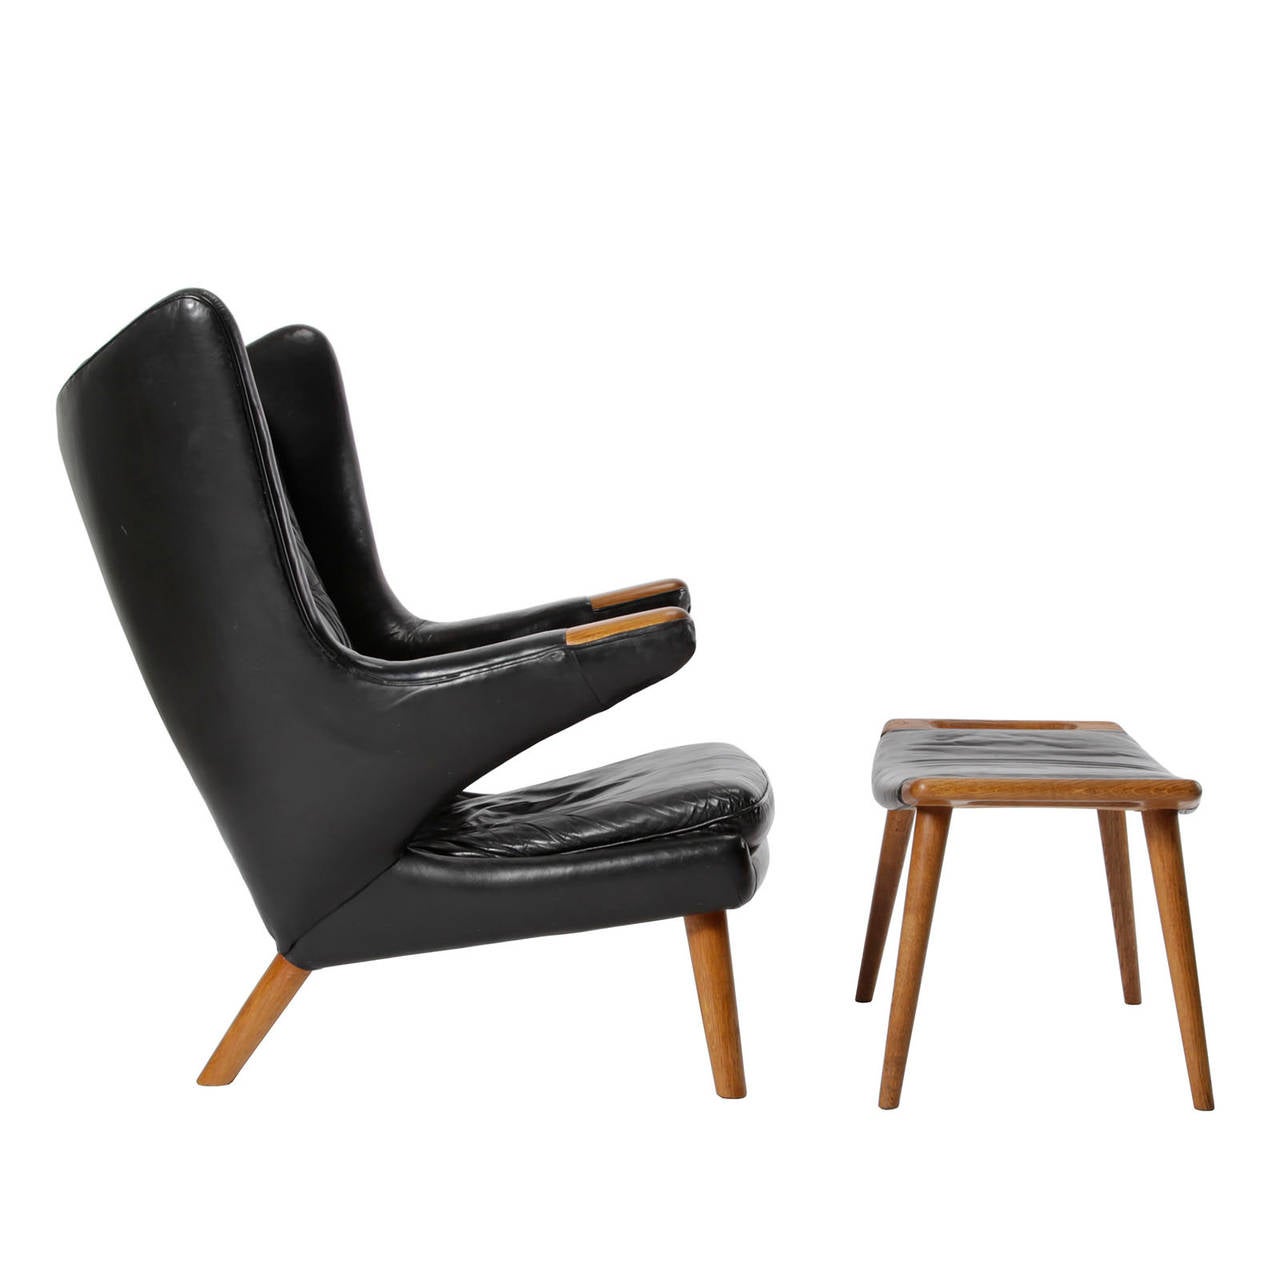 A rare version of the Papa Bear with original black leather. Designed by Hans Wegner in 1950. Made by AP Stolen, Denmark. Good original condition.